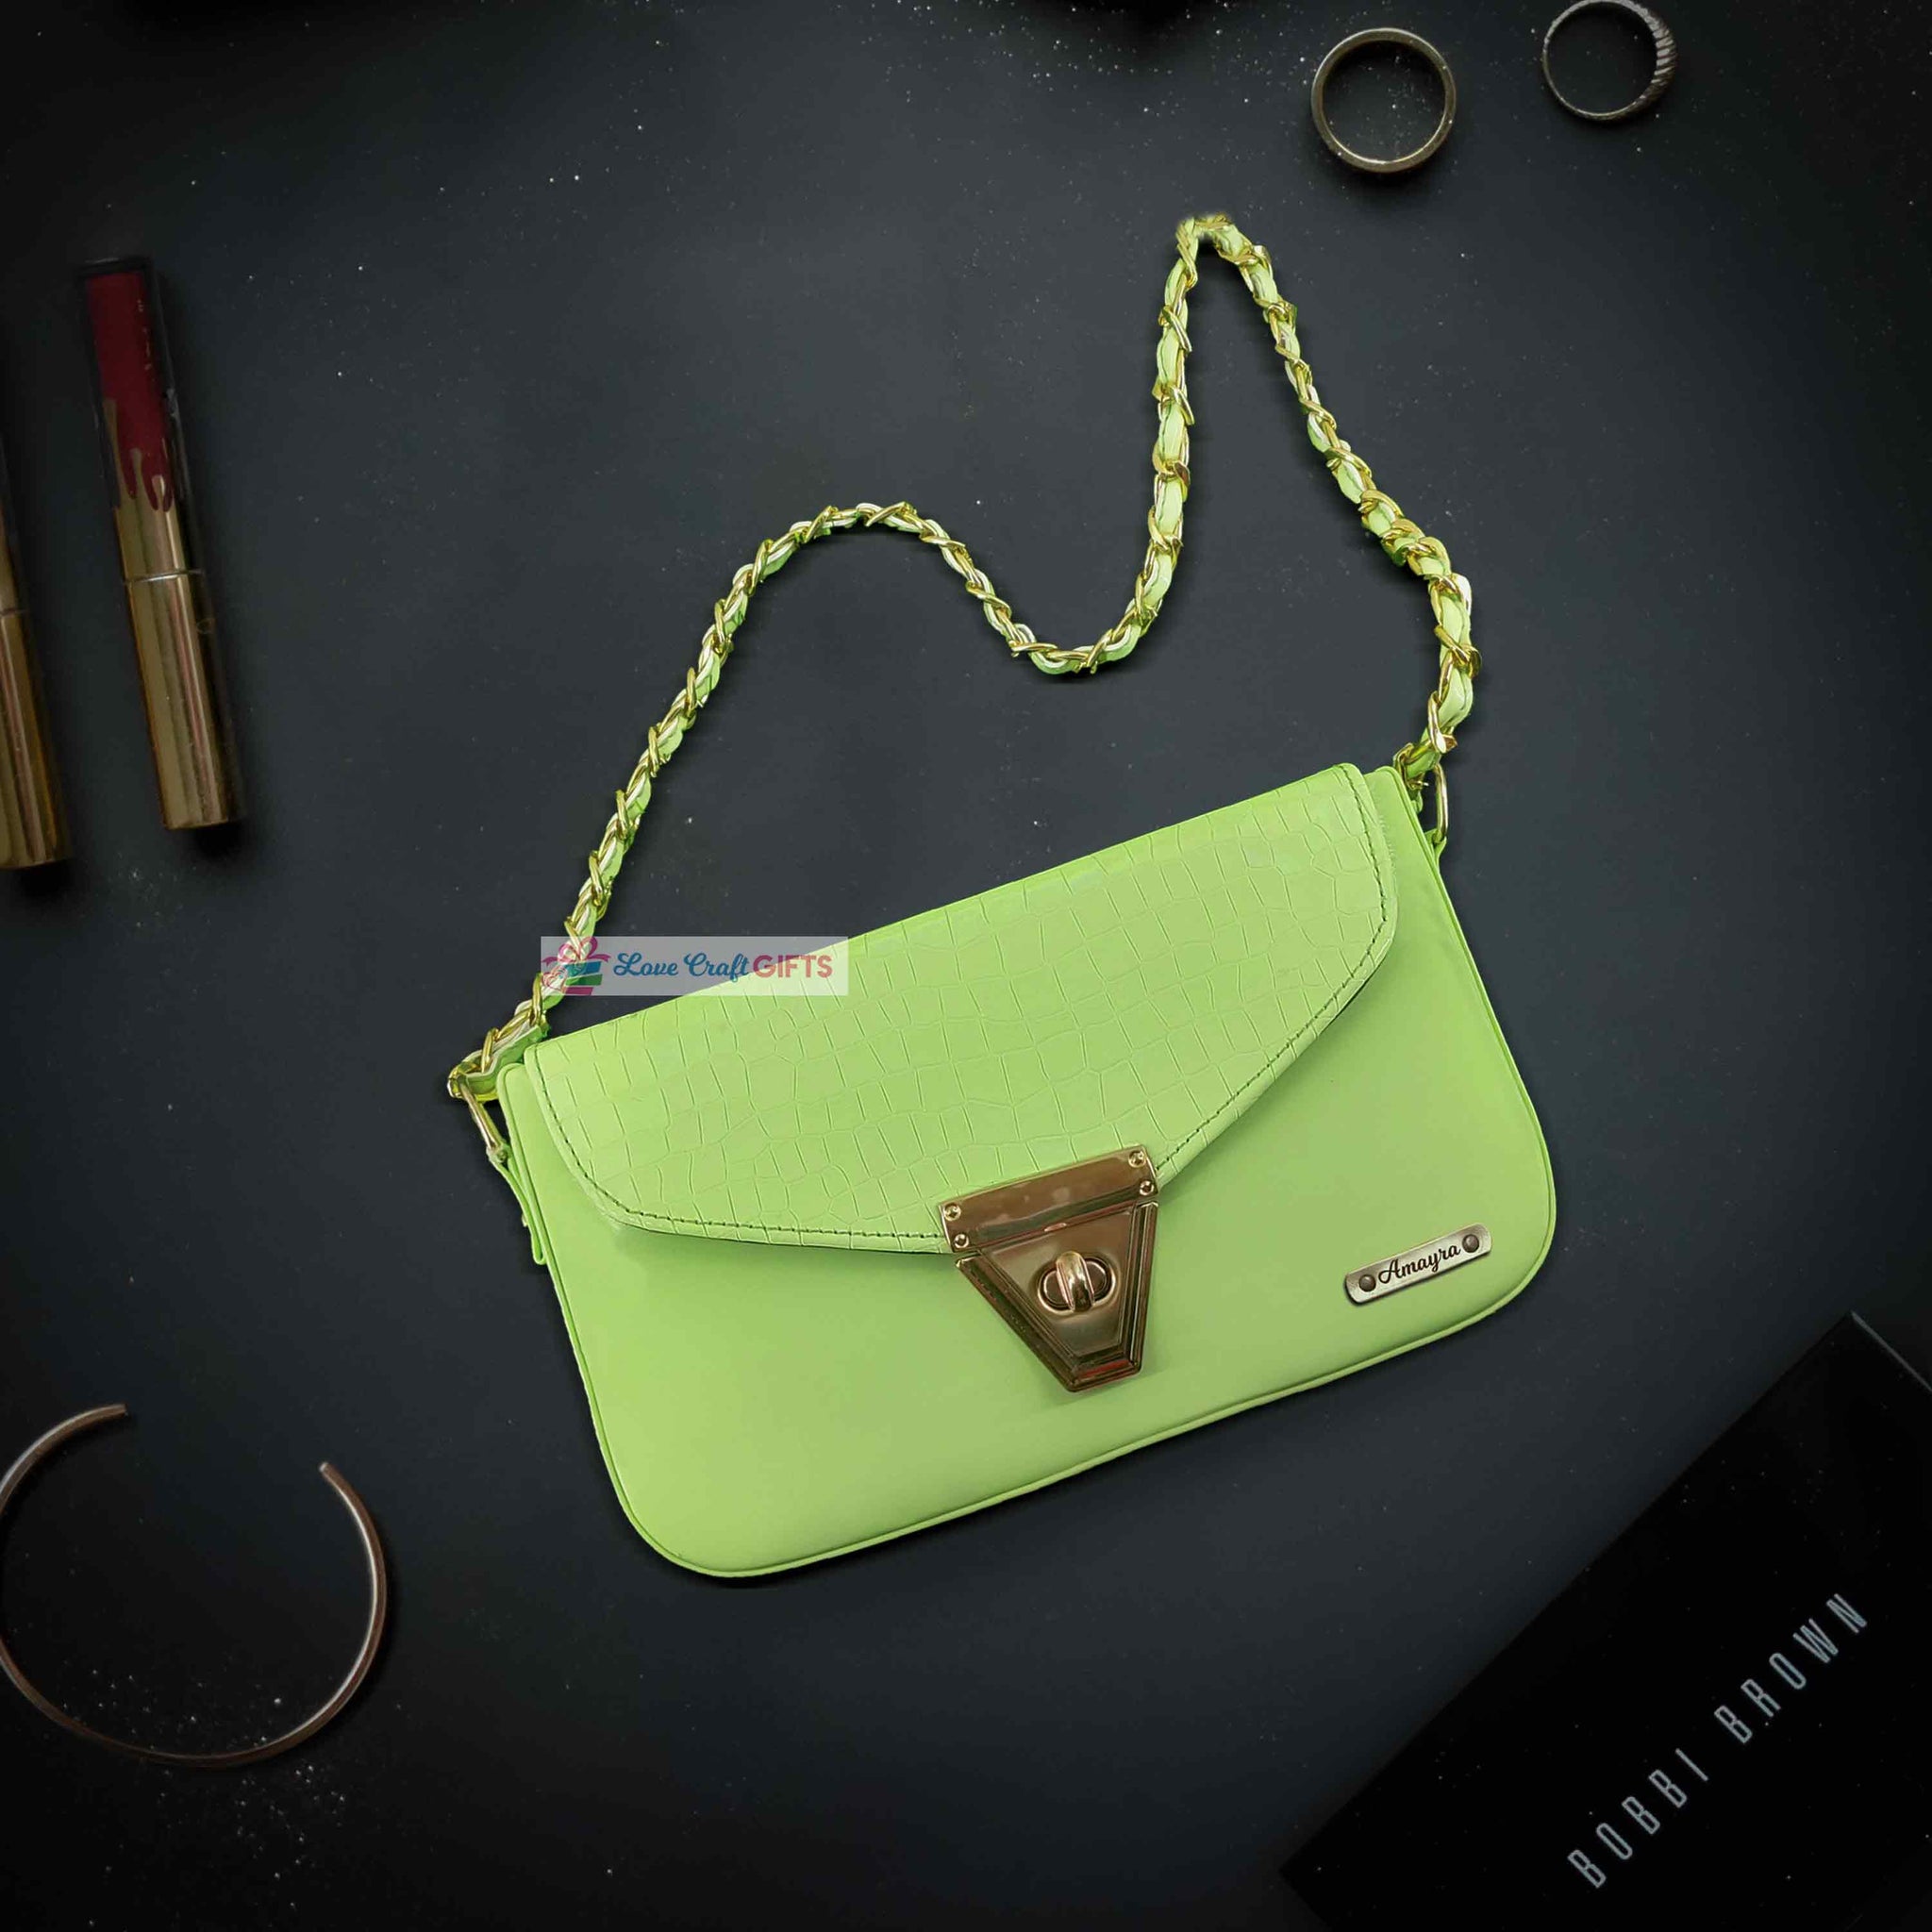 Personalized Premium Quality Clutch for Women